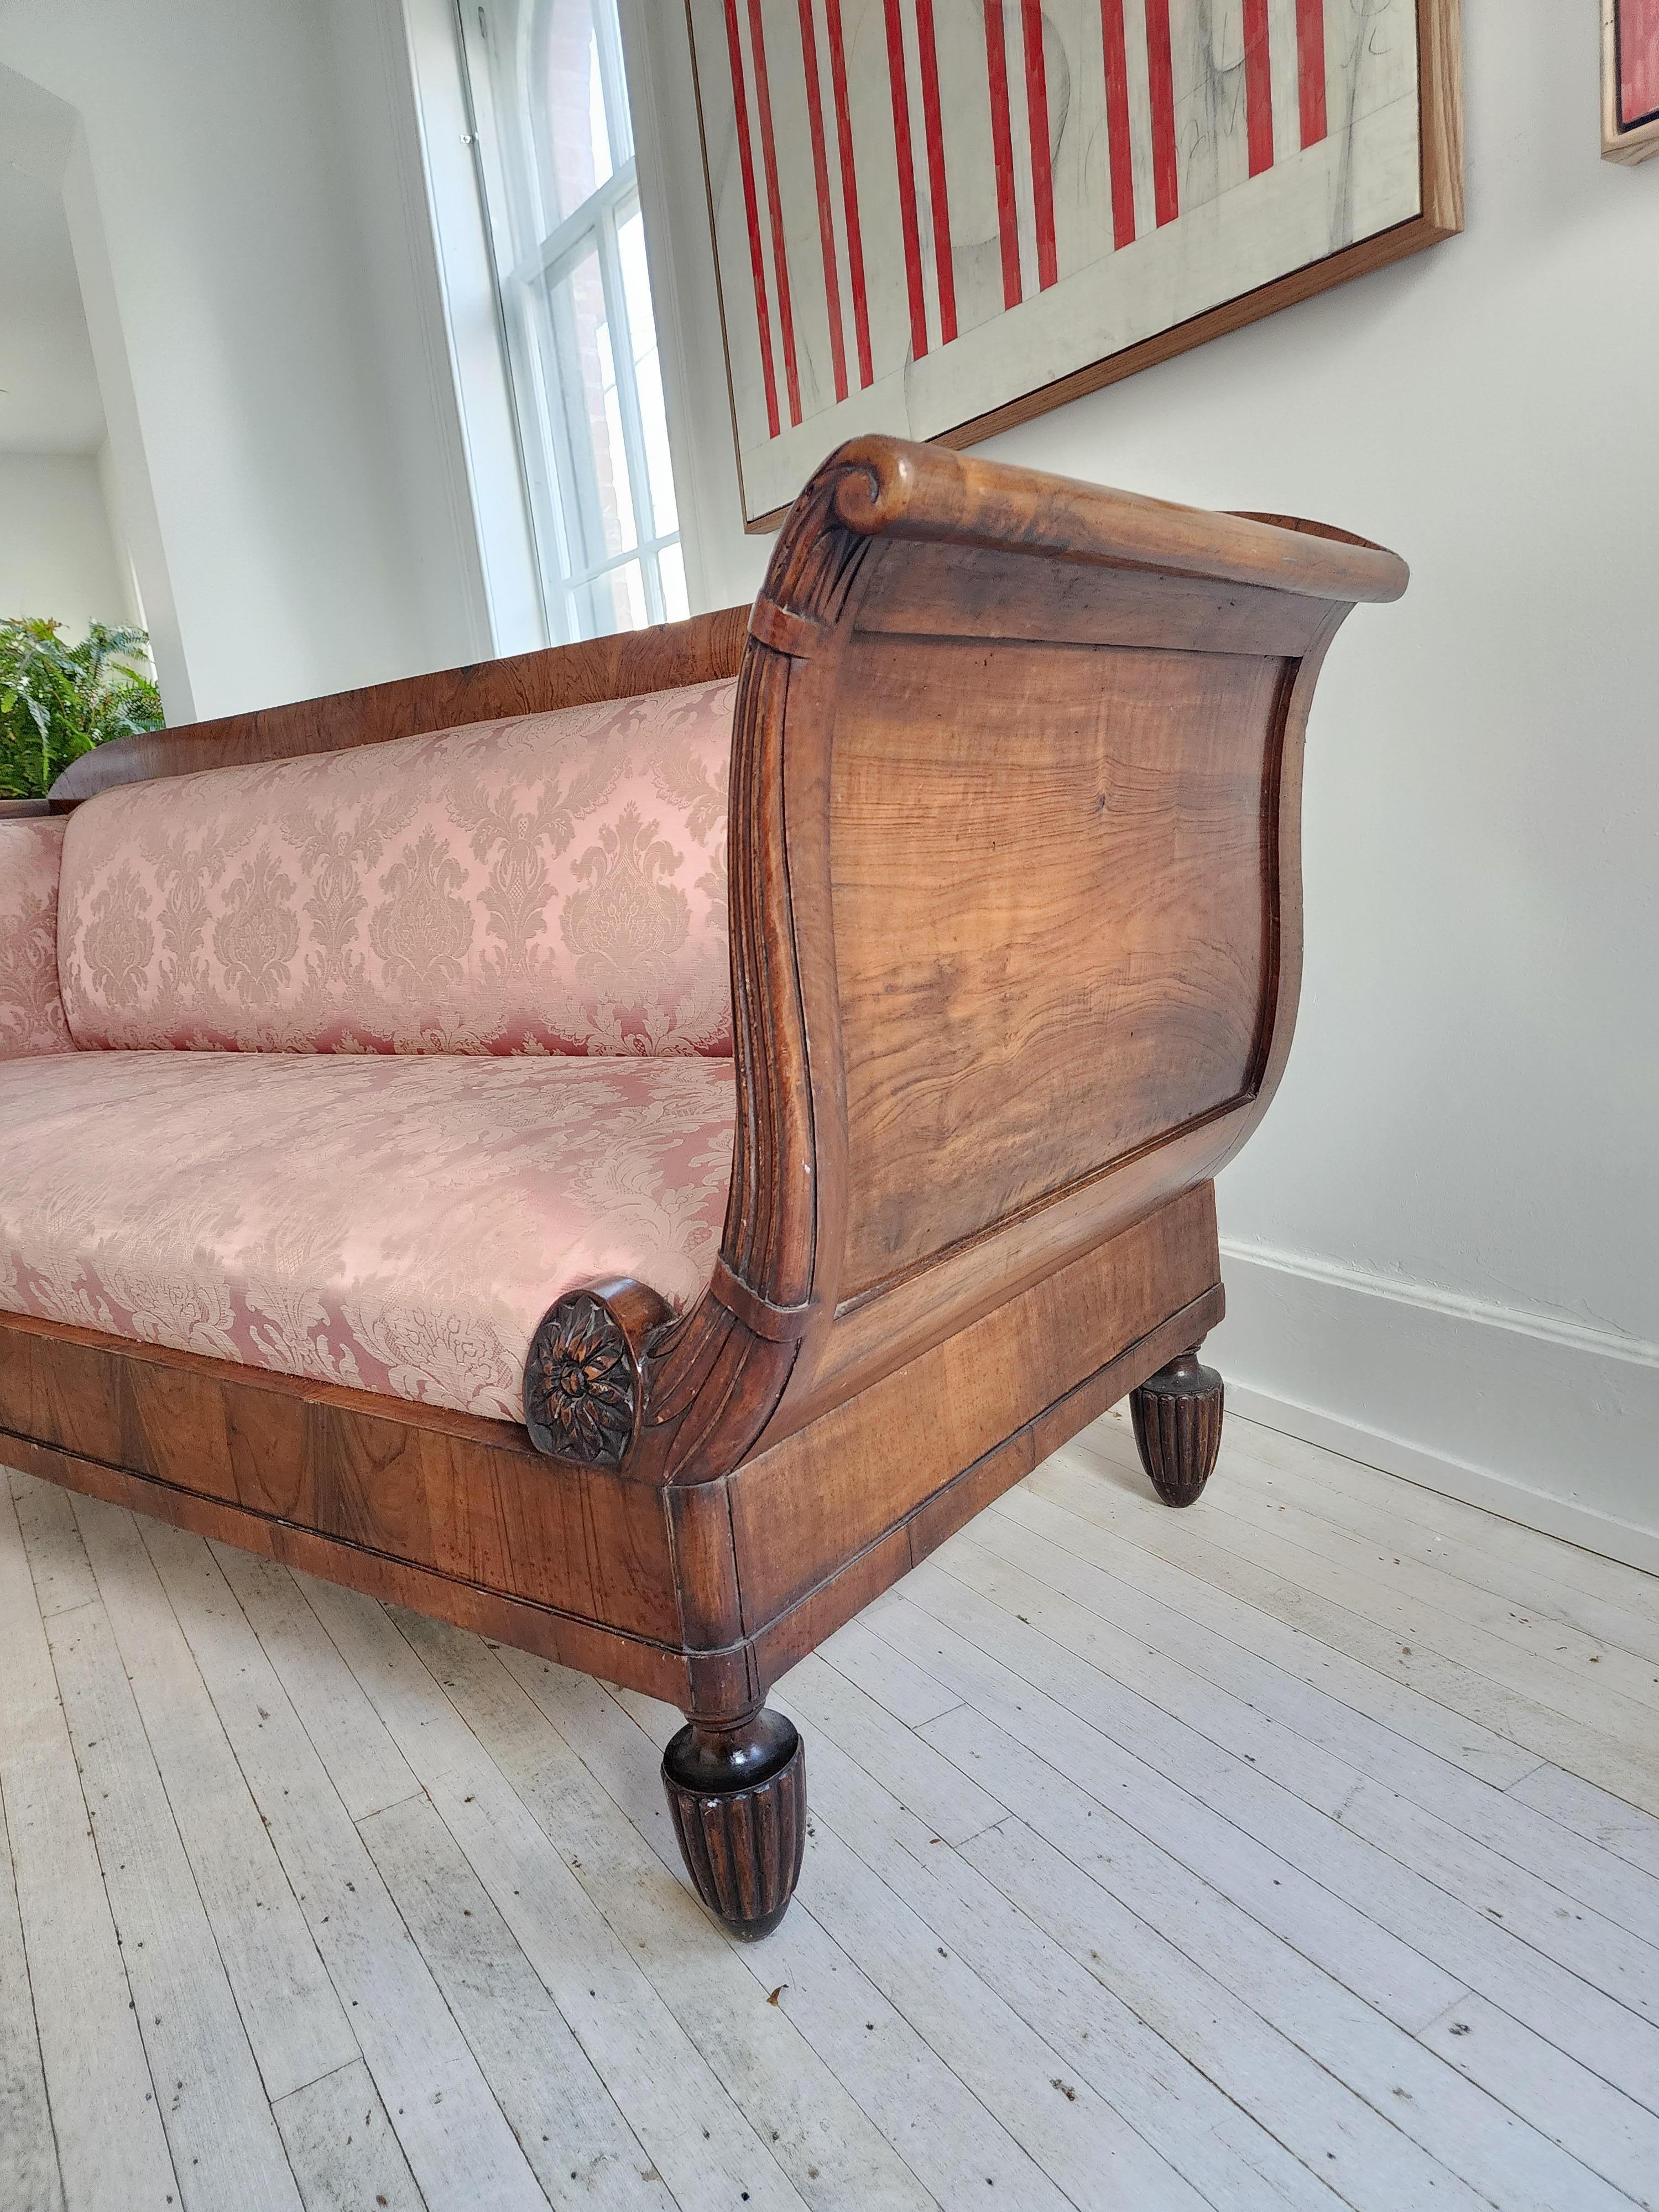 Great design, full of grace and presence. This large sofa, made in Italy, 1st half of the 19th century, is a rare find indeed. 
The beautiful carving on the fronts of the arms and how they slowly and gracefully curve back, add sense that the sofa is